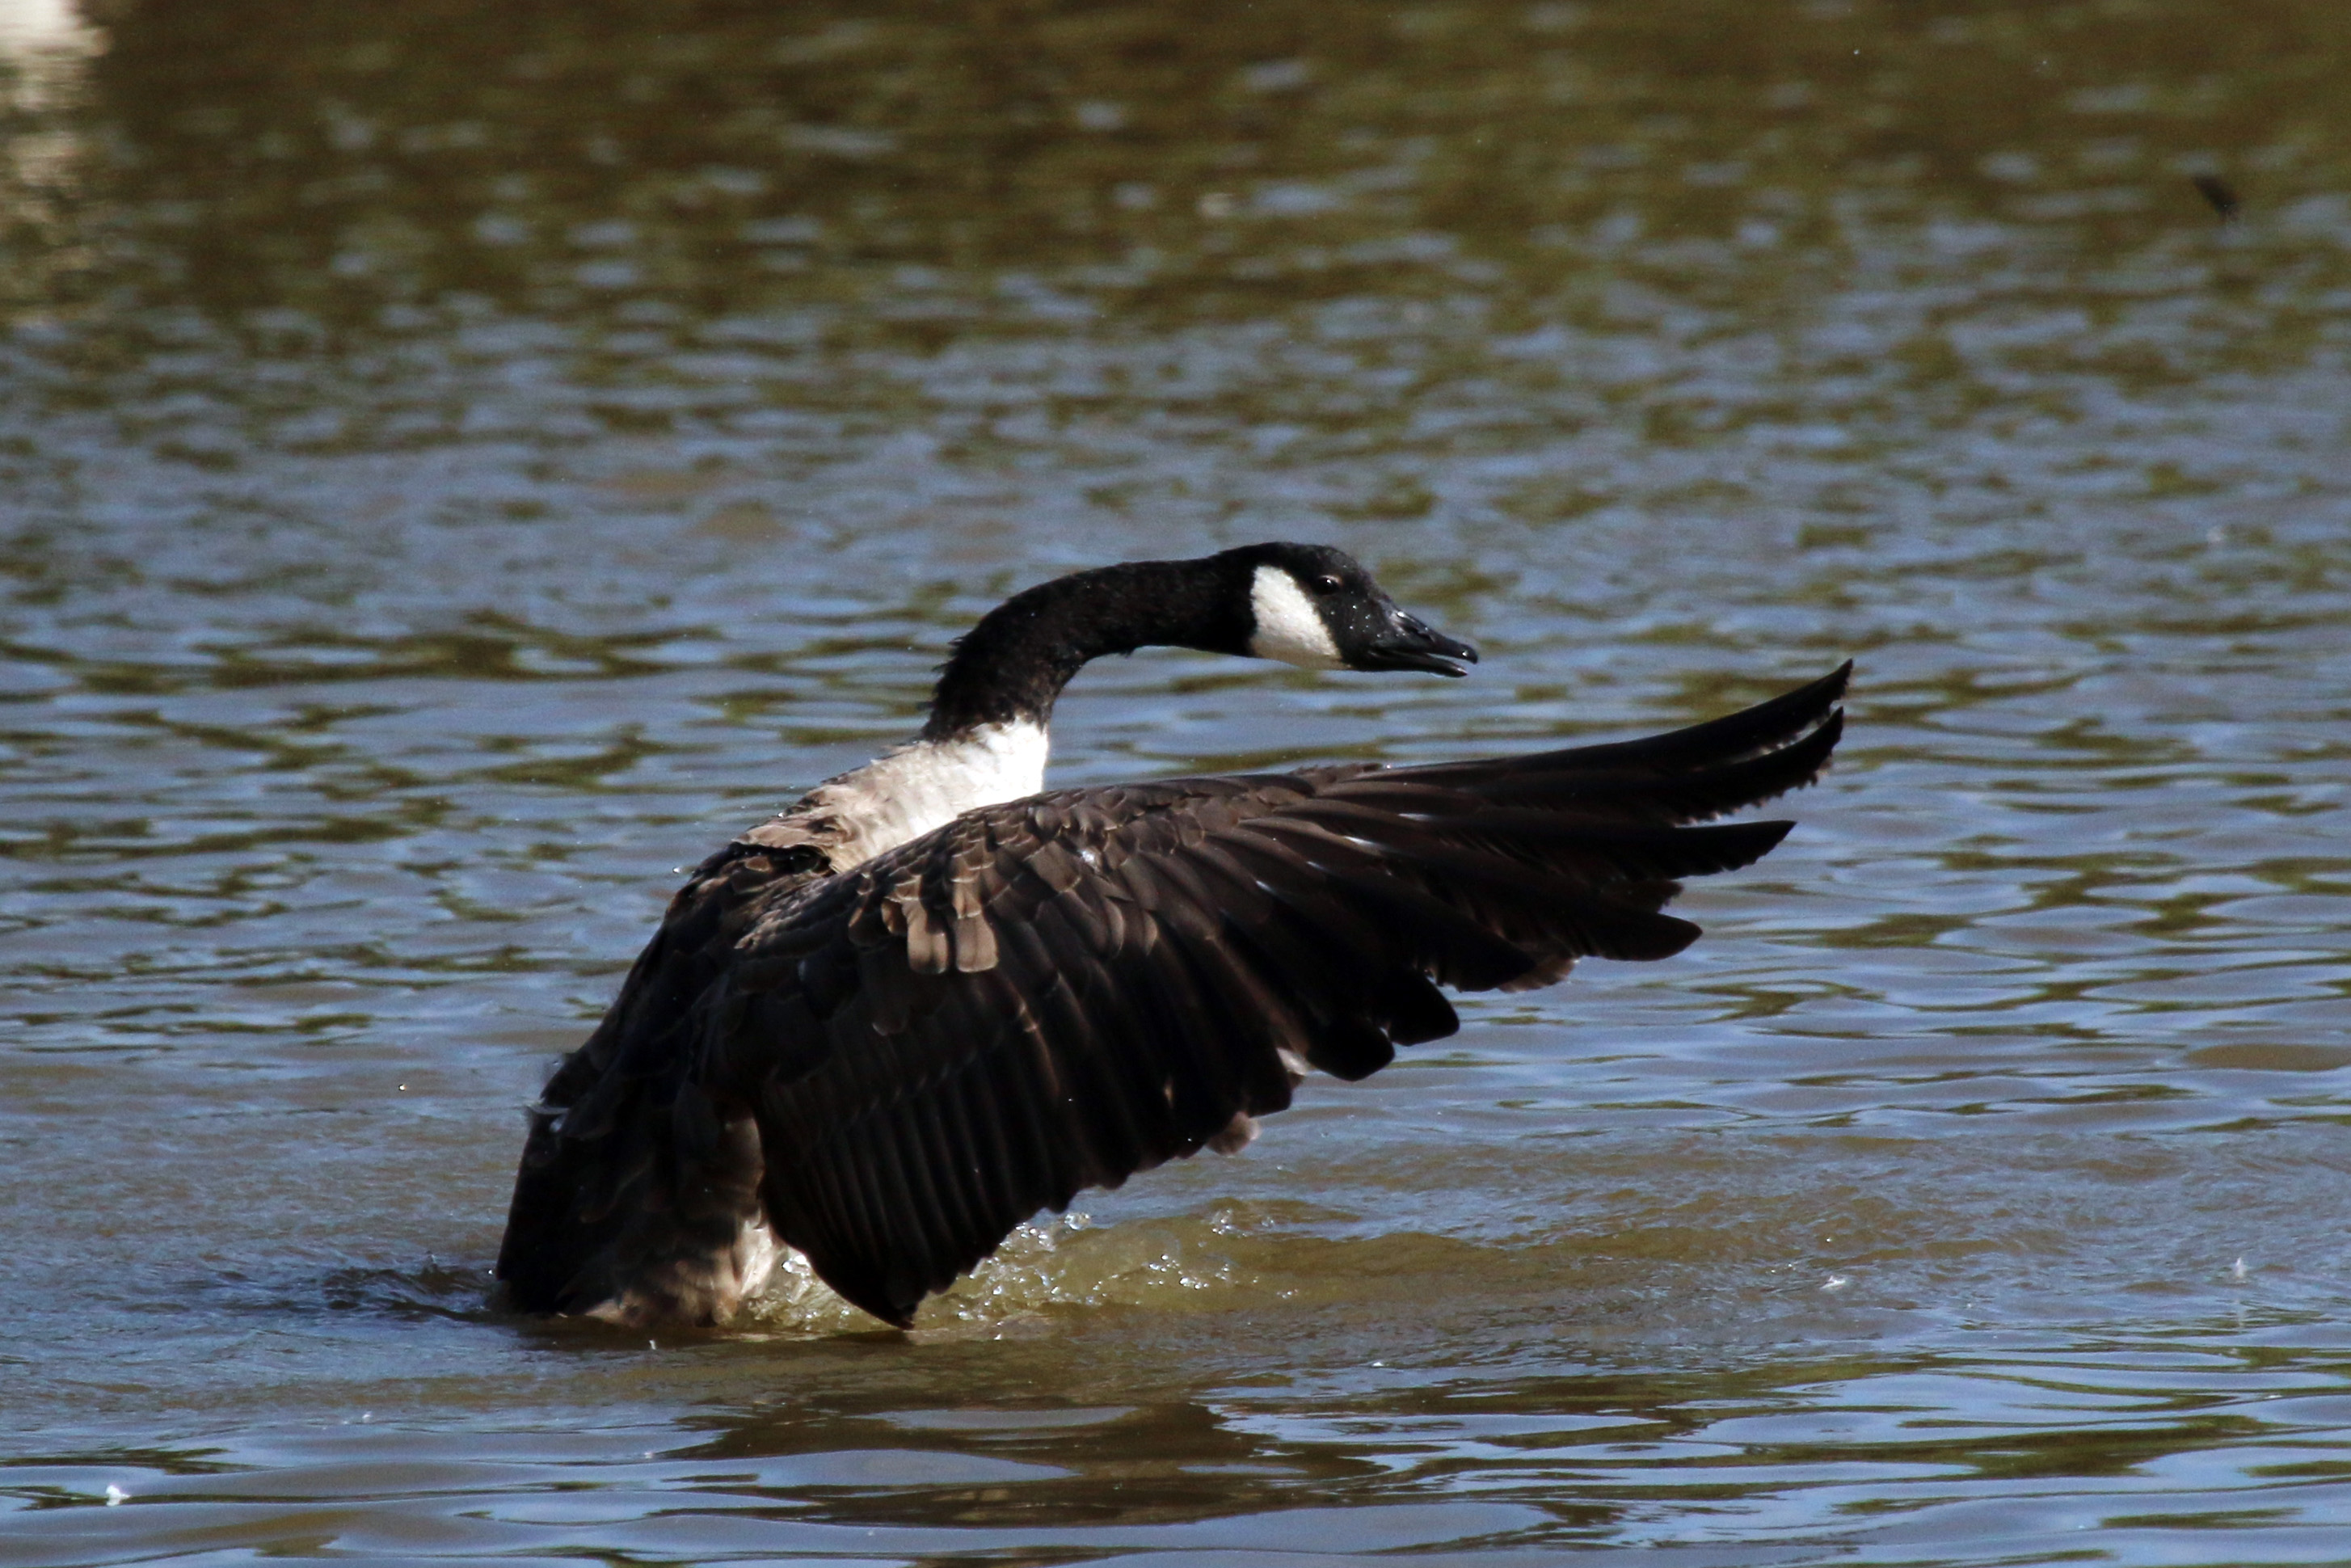 Canada goose (Branta canadensis) cleaning feathers in Oxfordshire, England. Photo taken by Charles J. Sharp on August 27, 2014.